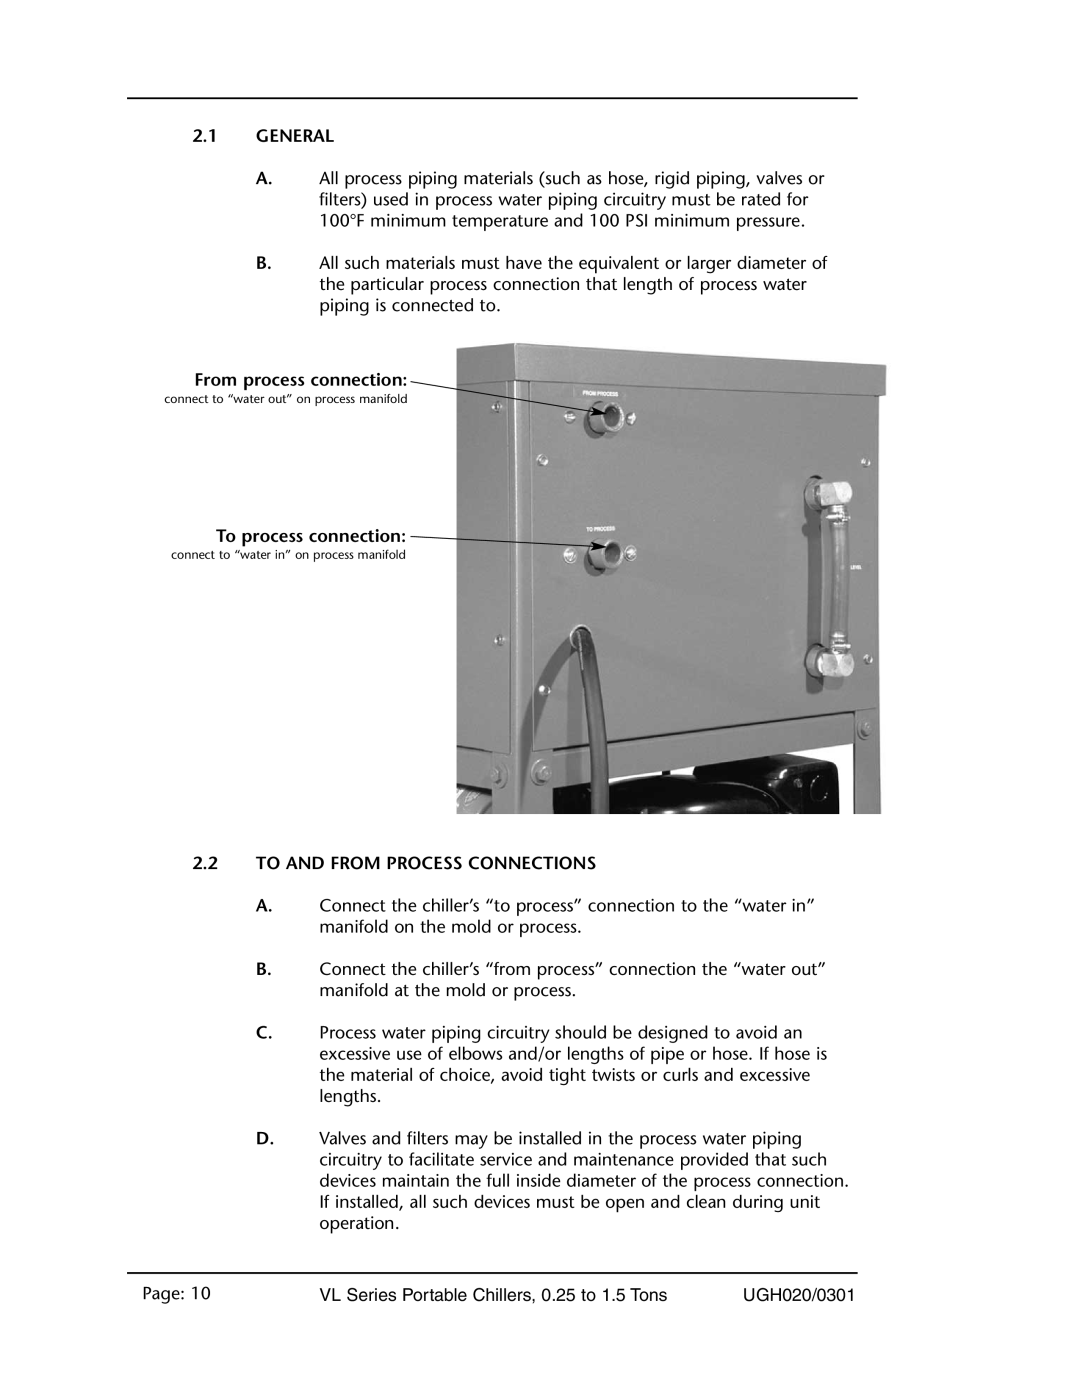 Conair VL Series manual 2.1GENERAL, From process connection, To process connection, 2.2TO AND FROM PROCESS CONNECTIONS 